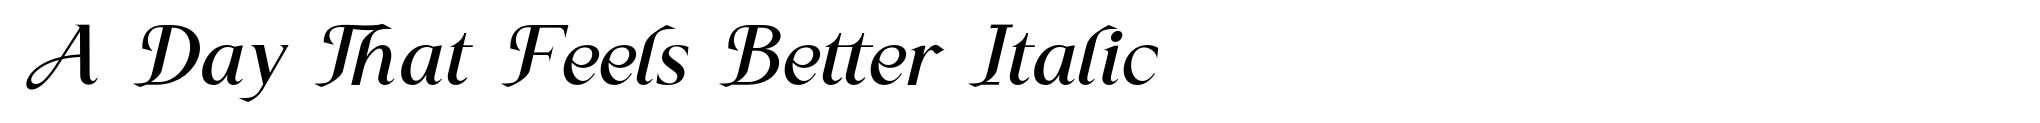 A Day That Feels Better Italic image